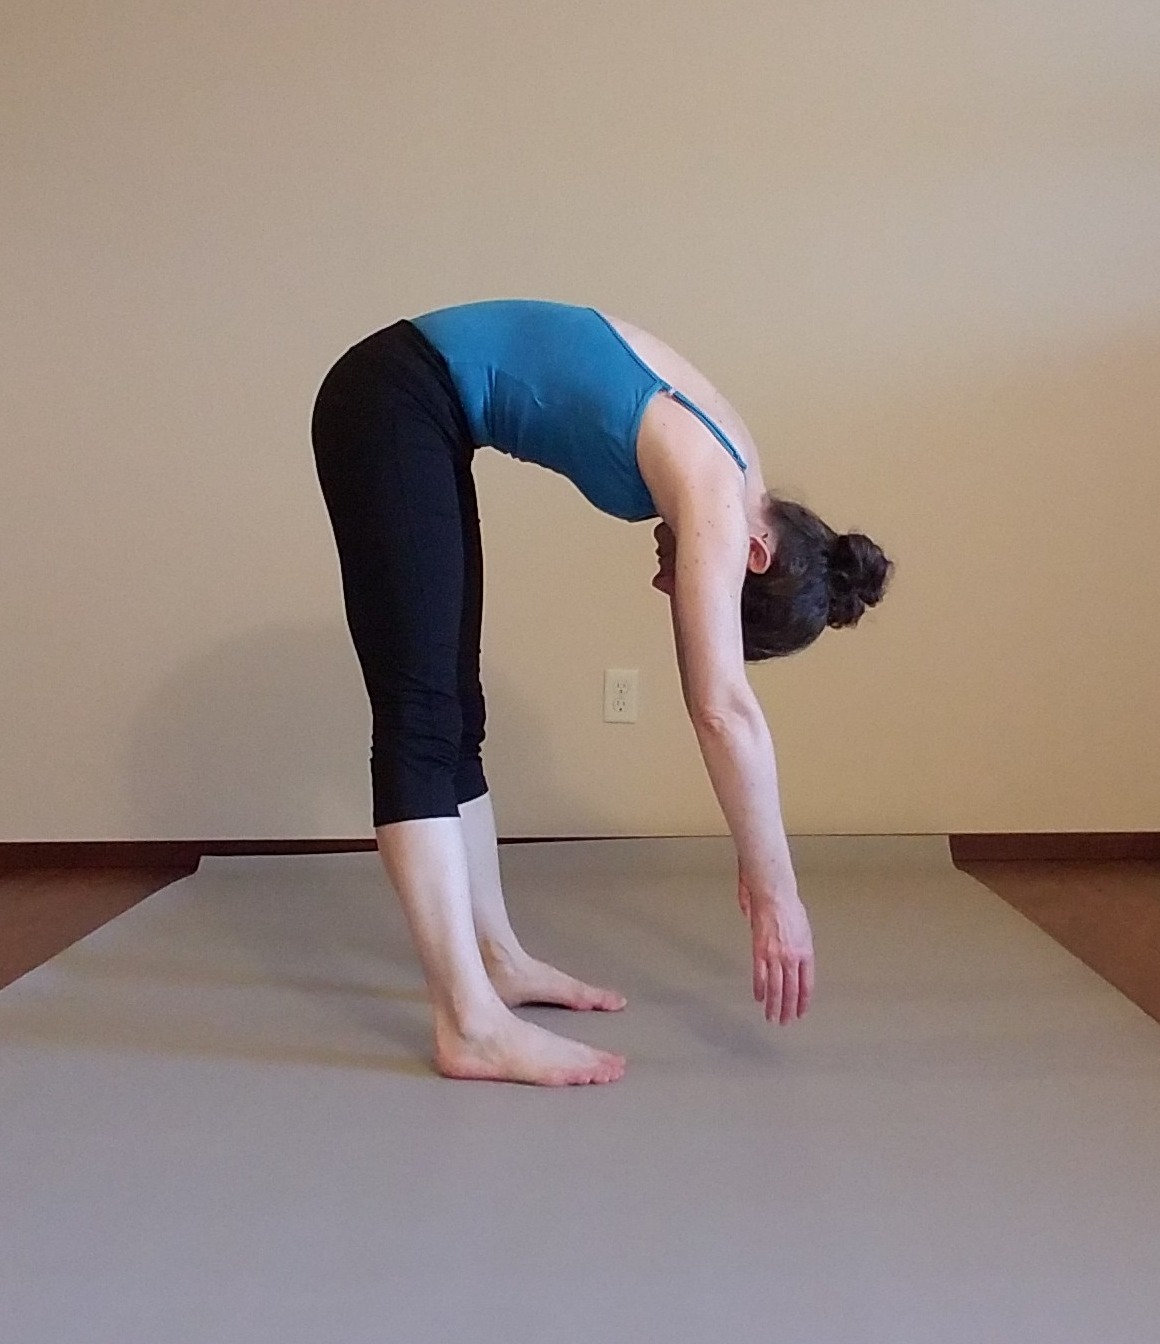 Instructor Kate Feinberg Robins demonstrates a Pilates Roll-Down standing on bare feet on a light gray floor at home with arms and head hanging down, back rounded and stomach scooped